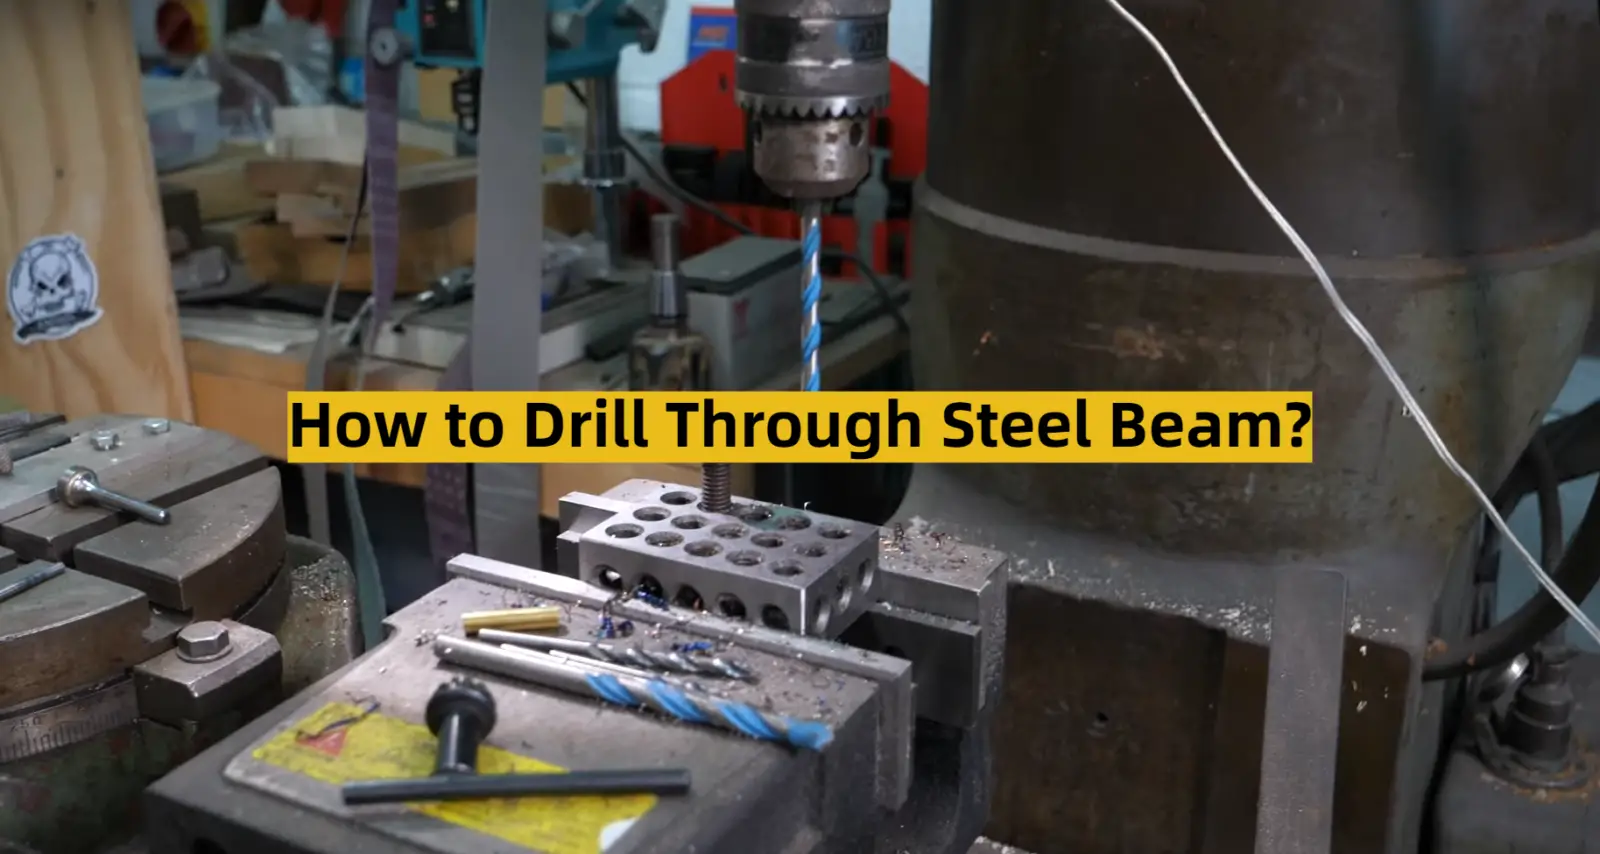 How to Drill Through Steel Beam?